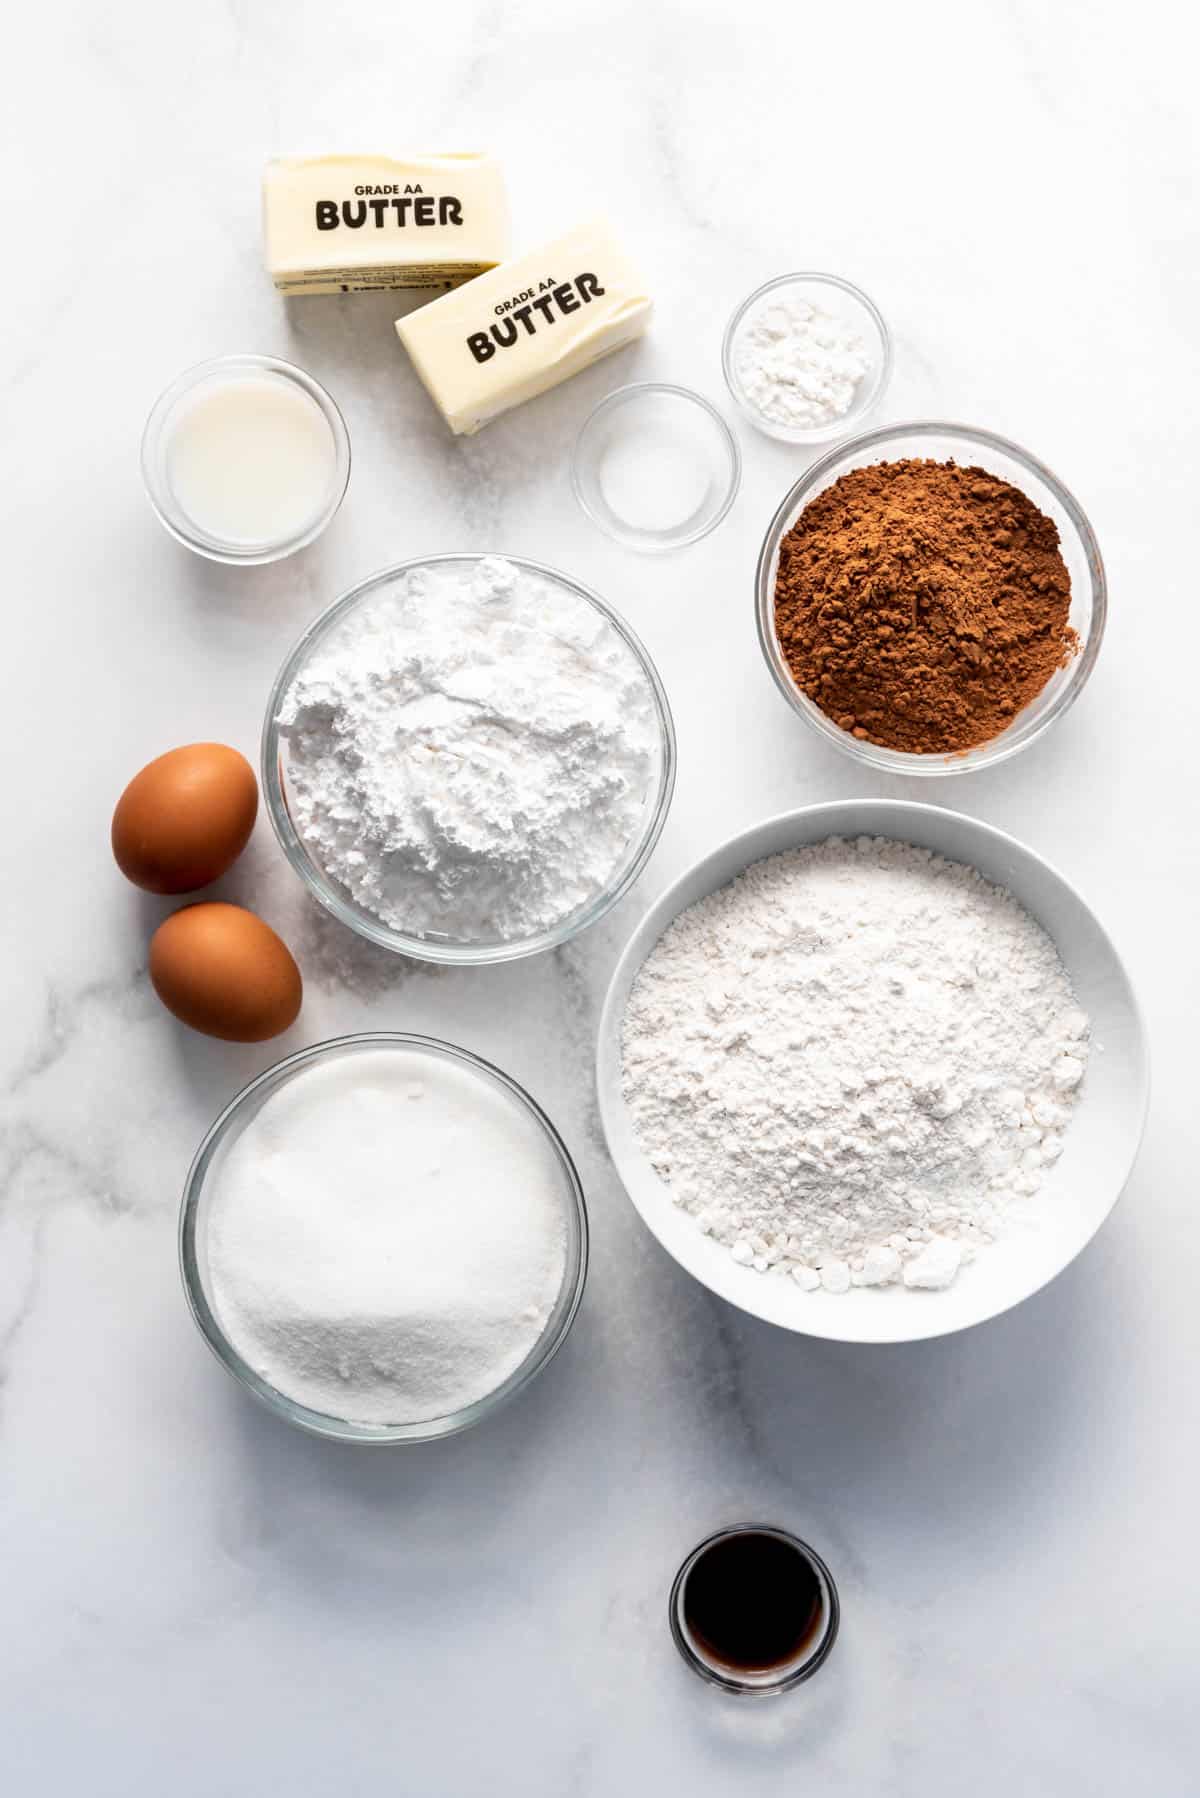 Ingredients for Cutler's chocolate marshmallow cookies.